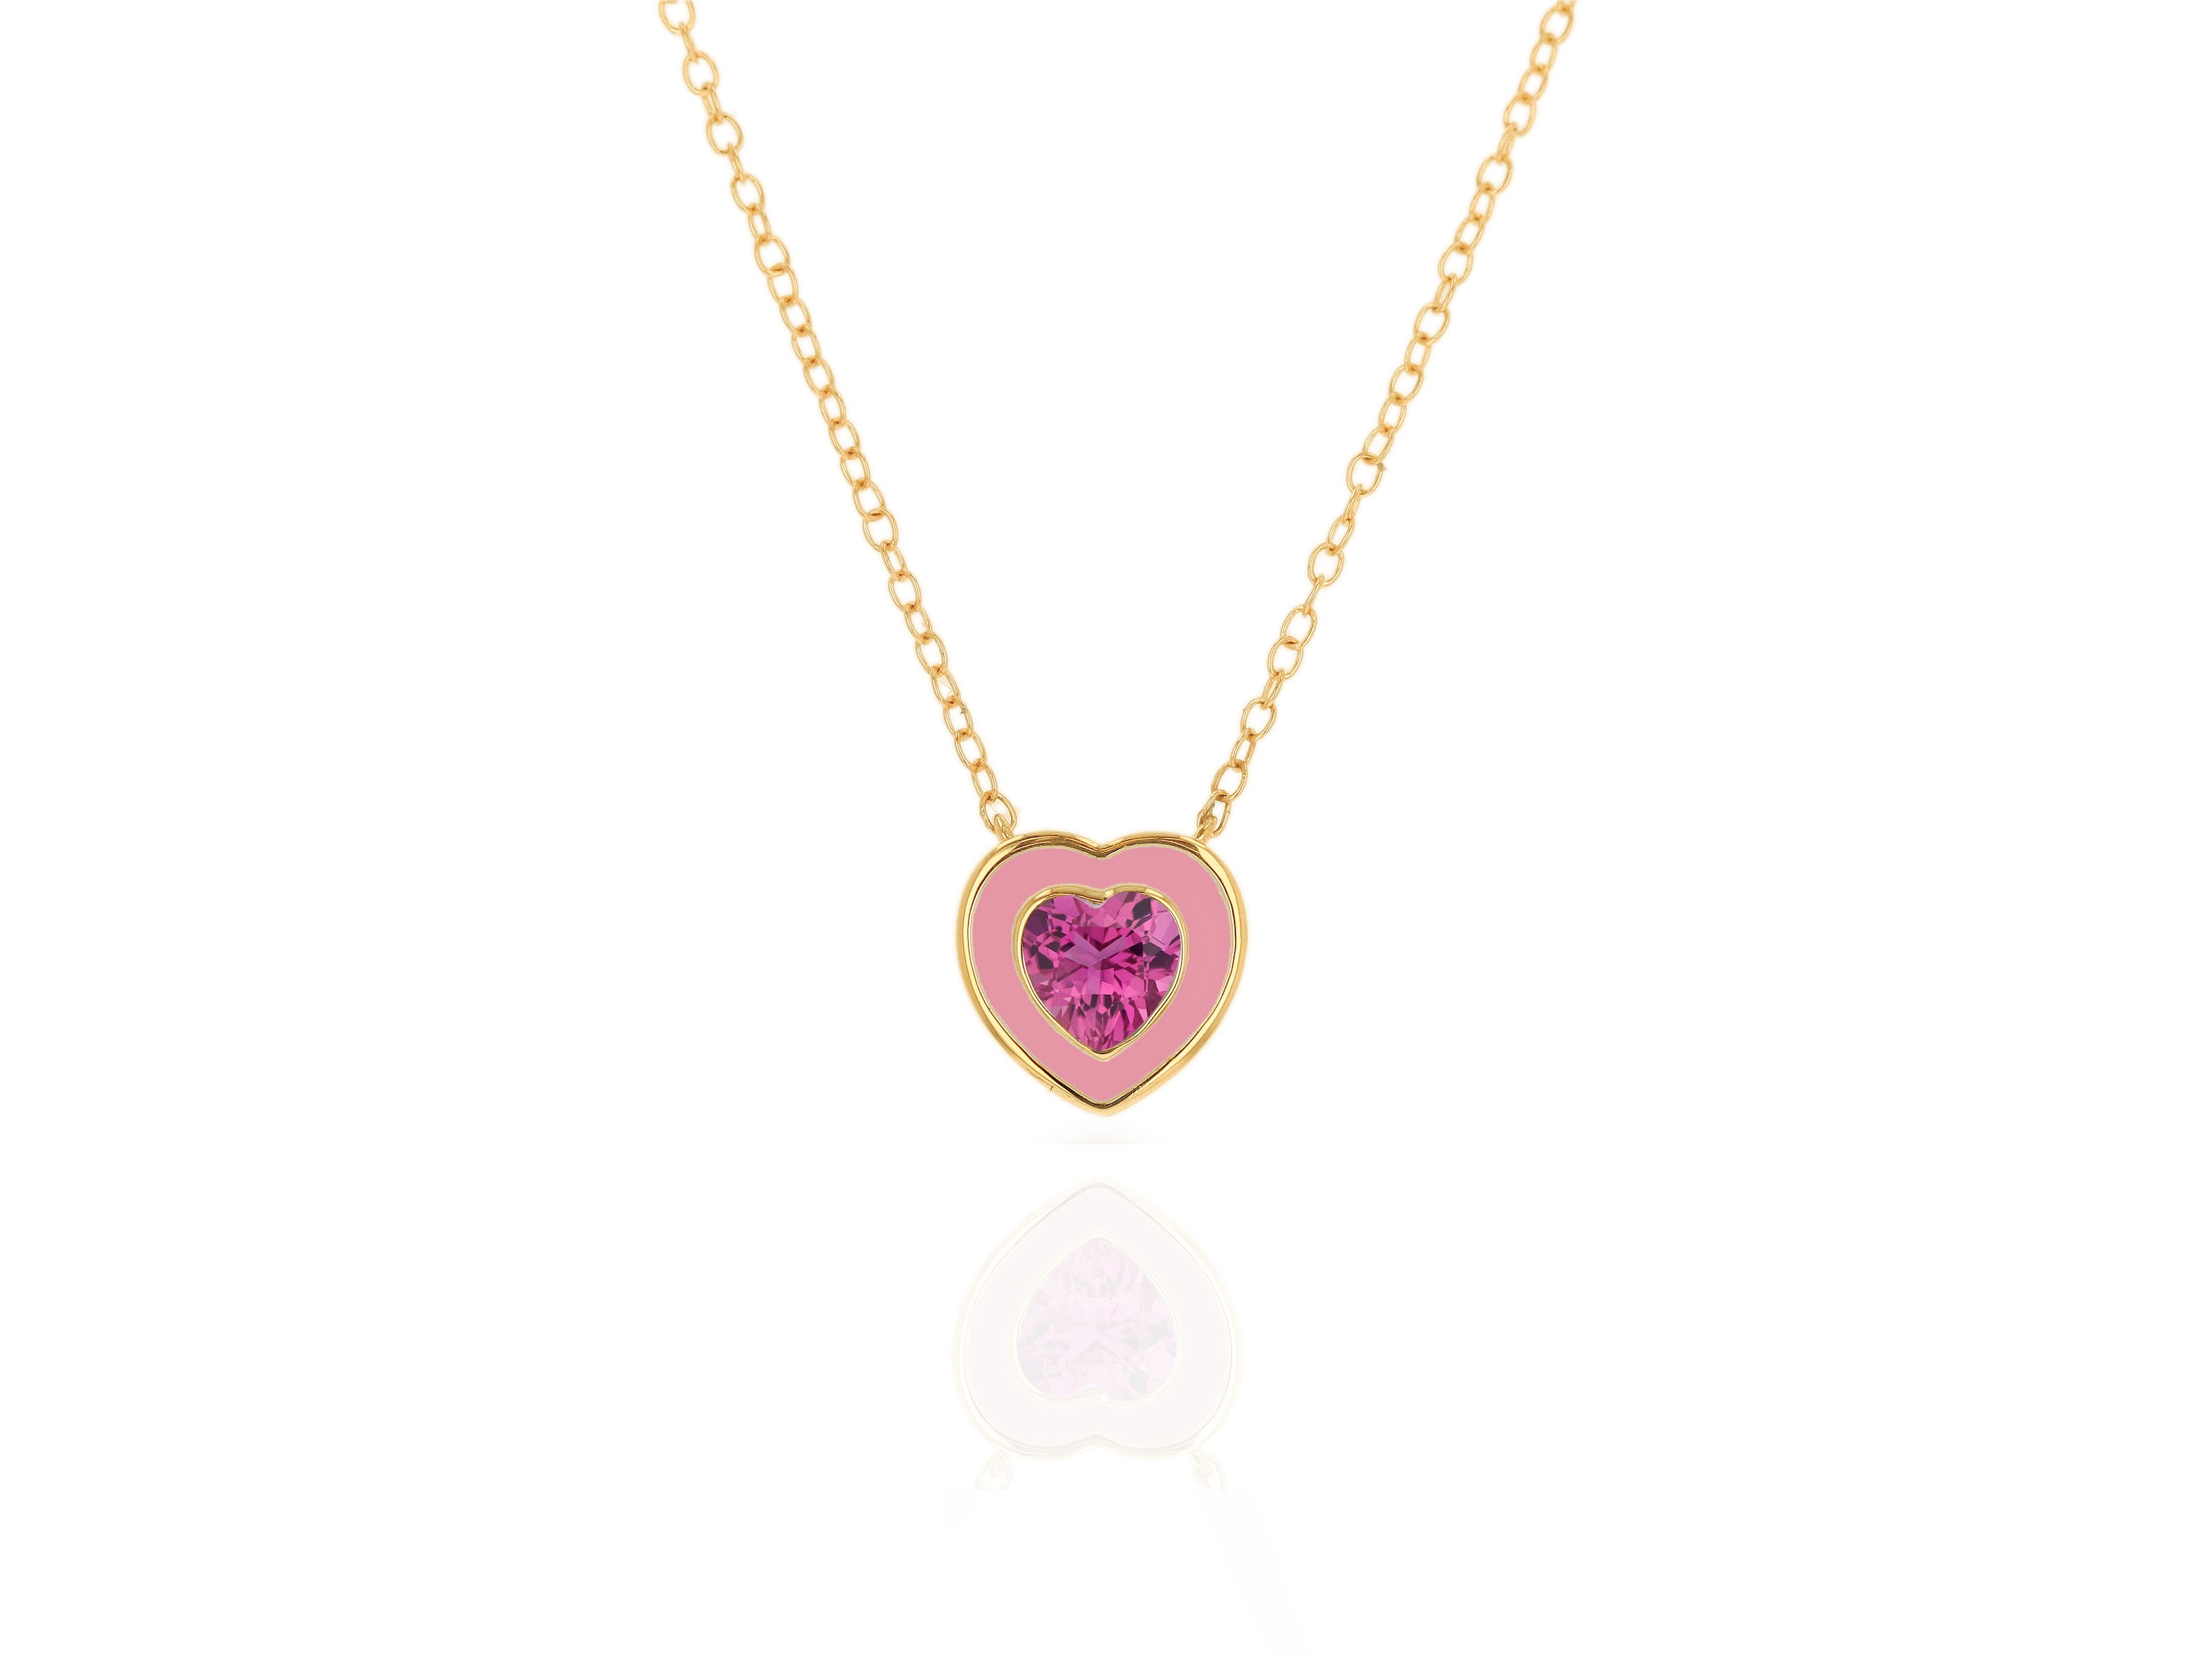 Light Pink Enamel and Pink Tourmaline Heart Necklace